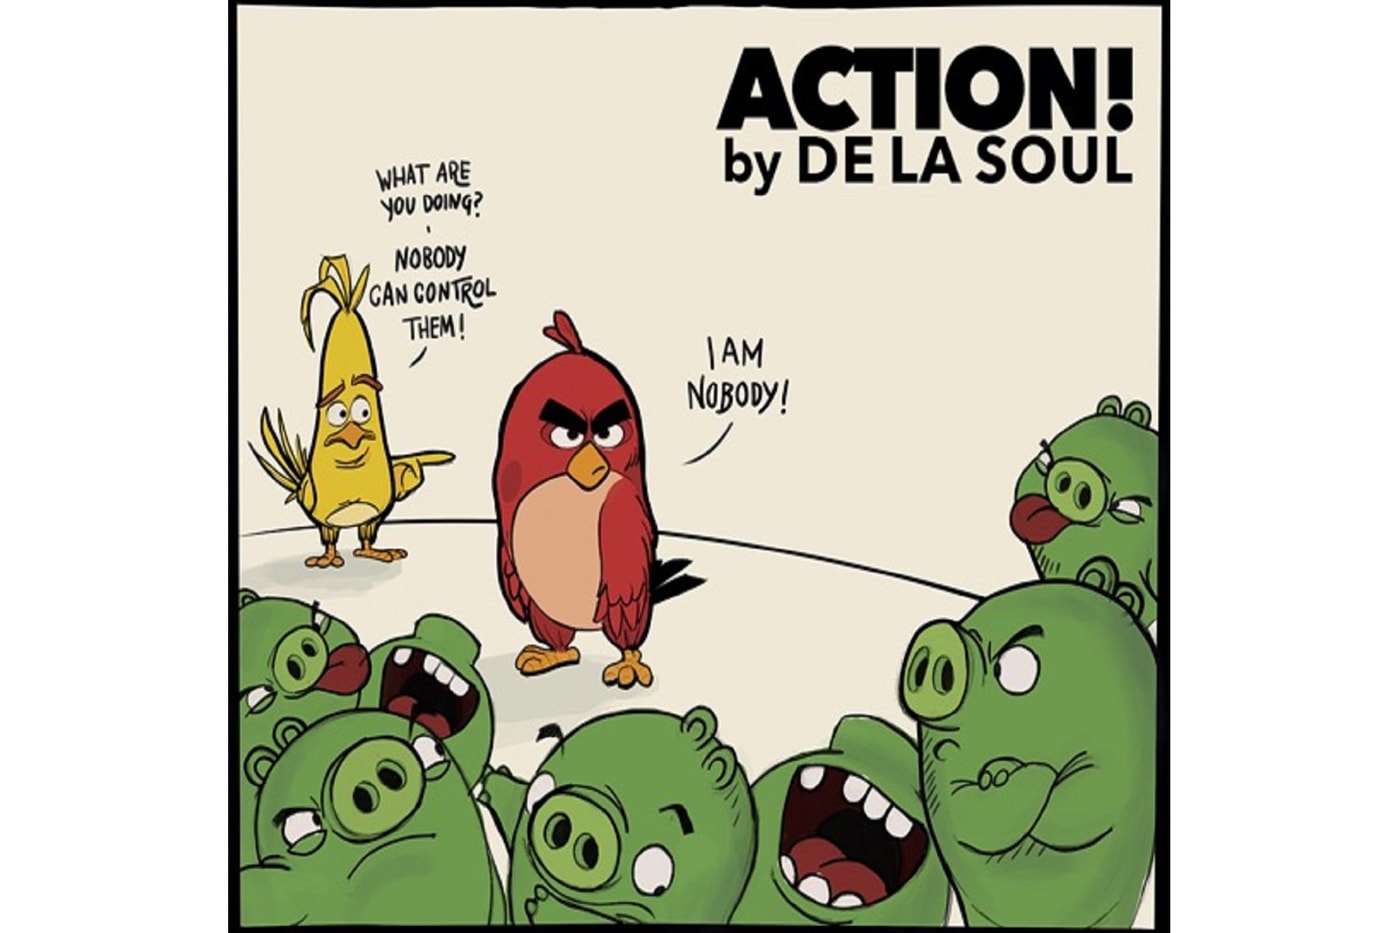 angry-birds-recruit-de-la-soul-for-new-song-action